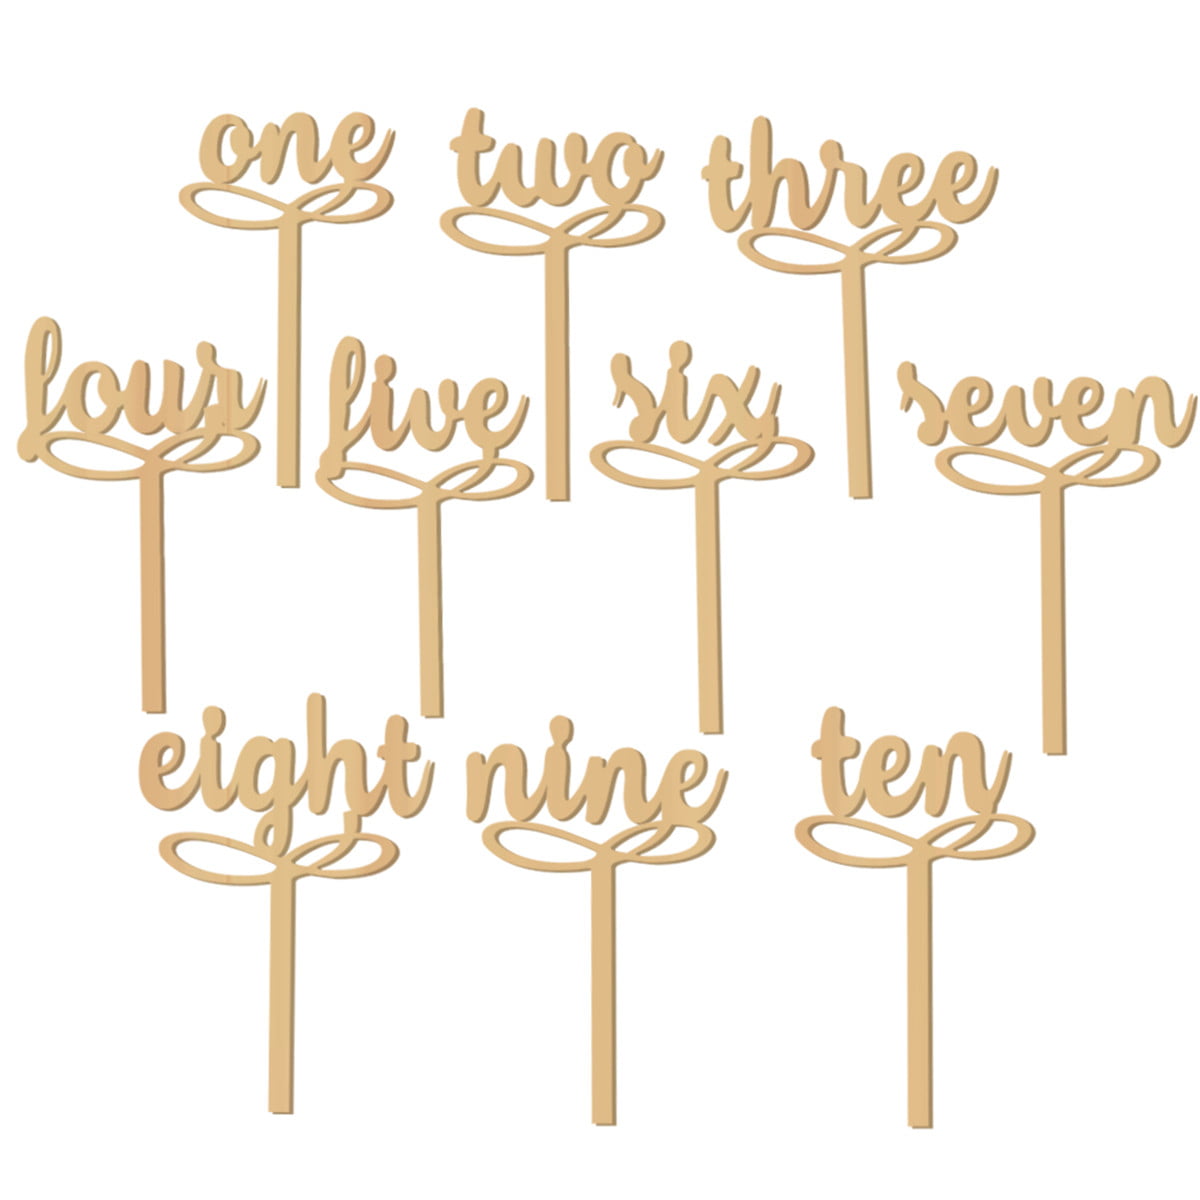 1-10 Wooden Table Numbers set Freestand Stick Wedding Birthday Party Decor new 